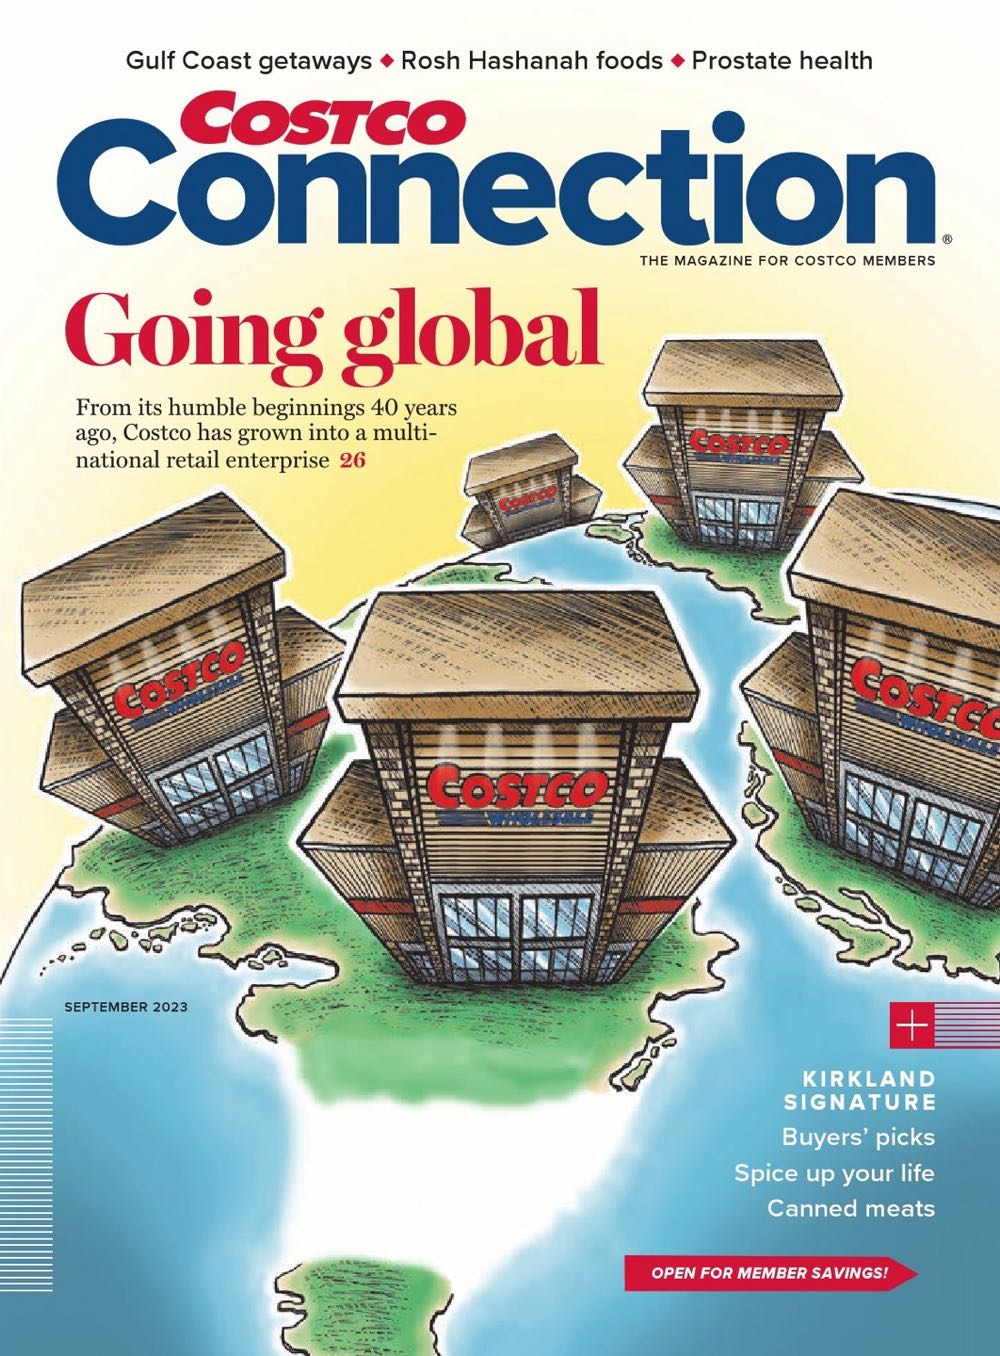 Costco Connection  (September) magazine collectible - Main Image 1